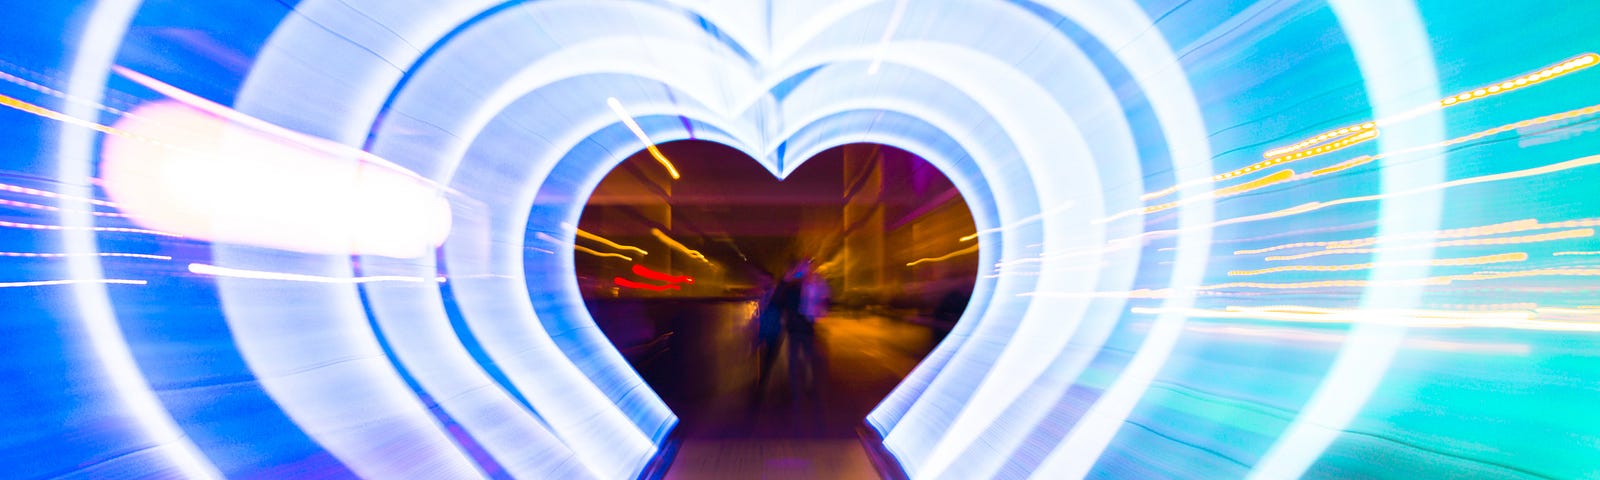 Creative picture with zoom technique of illuminated hearts creating tunnel effect with light trails.